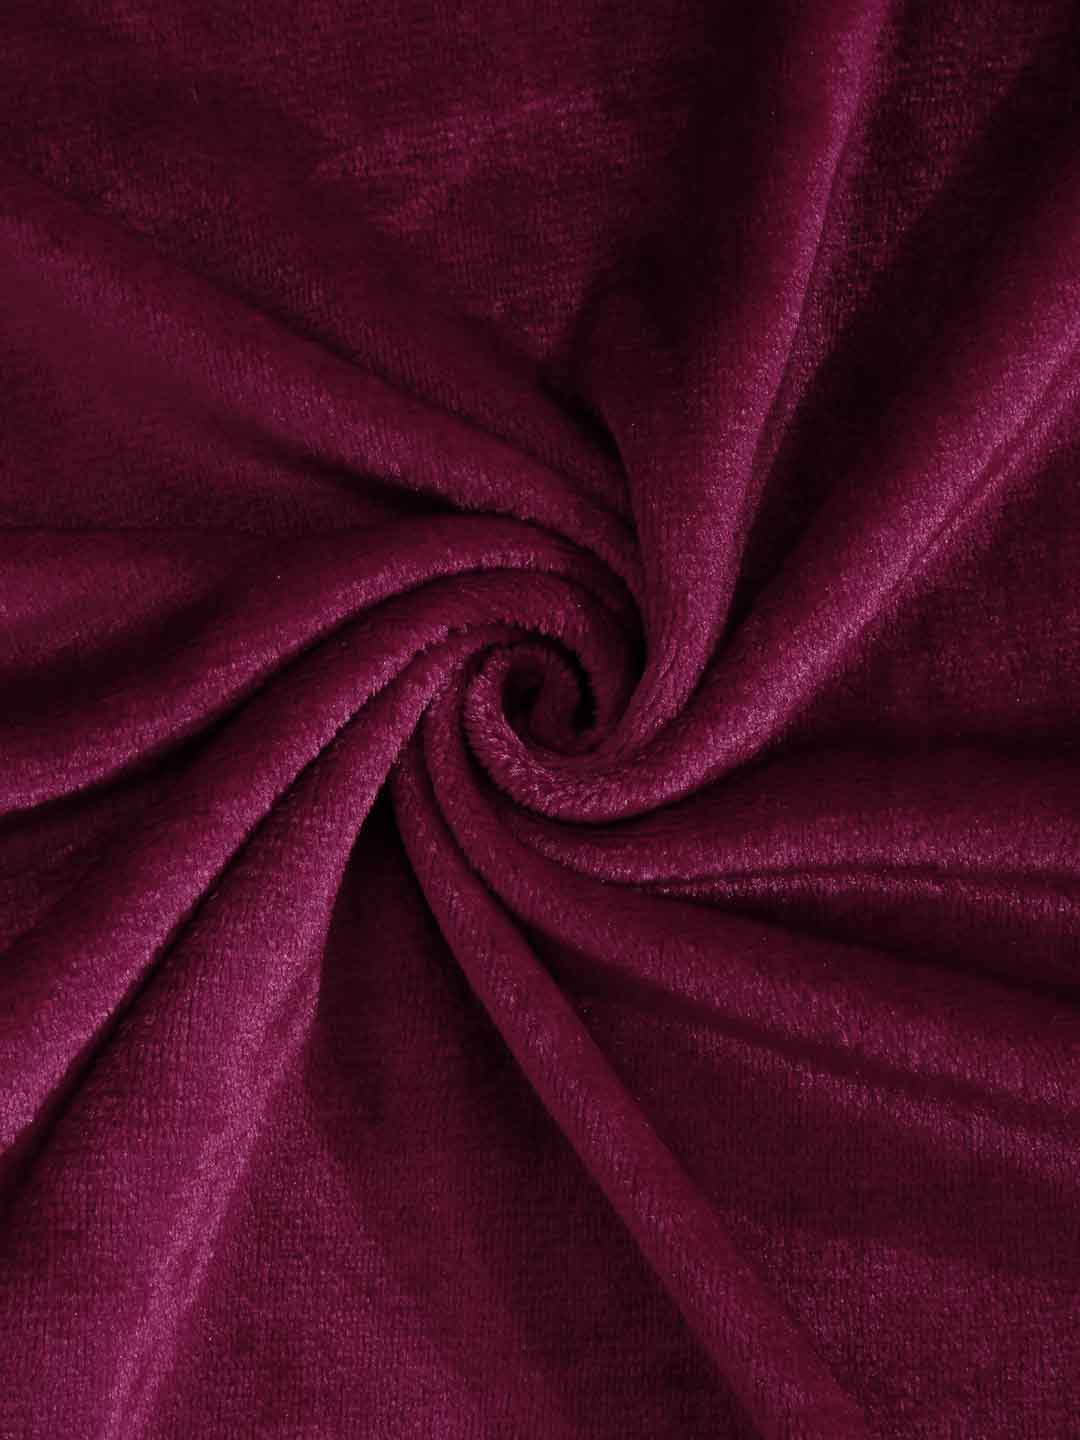 Klotthe Maroon Solid Woolen Fitted Double Bed Sheet with 2 Pillow Covers